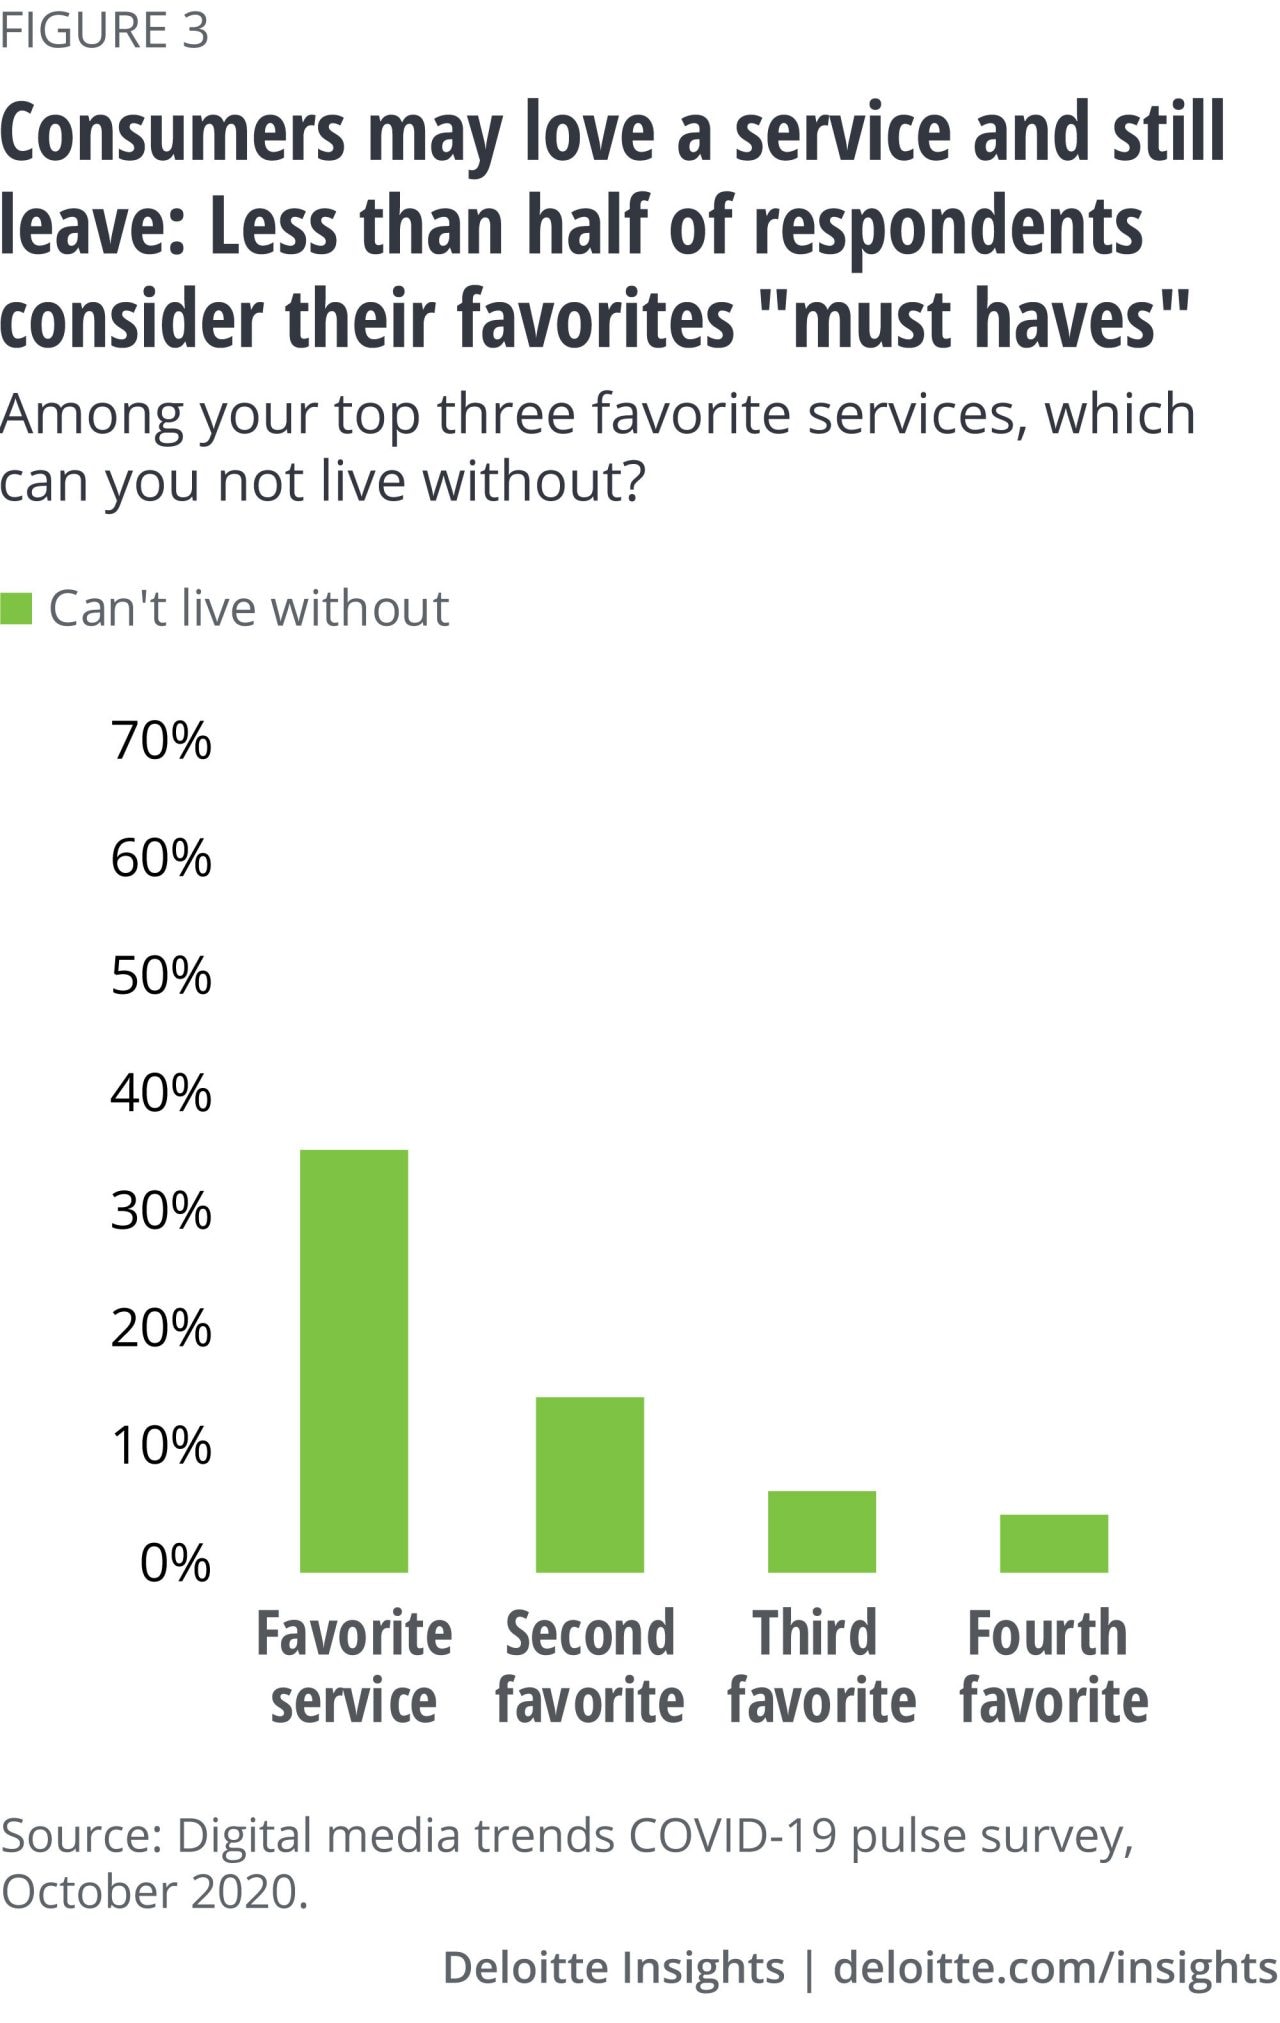 Figure 3. Consumers may love a service and still leave: Less than half of respondents consider their favorites “must haves”